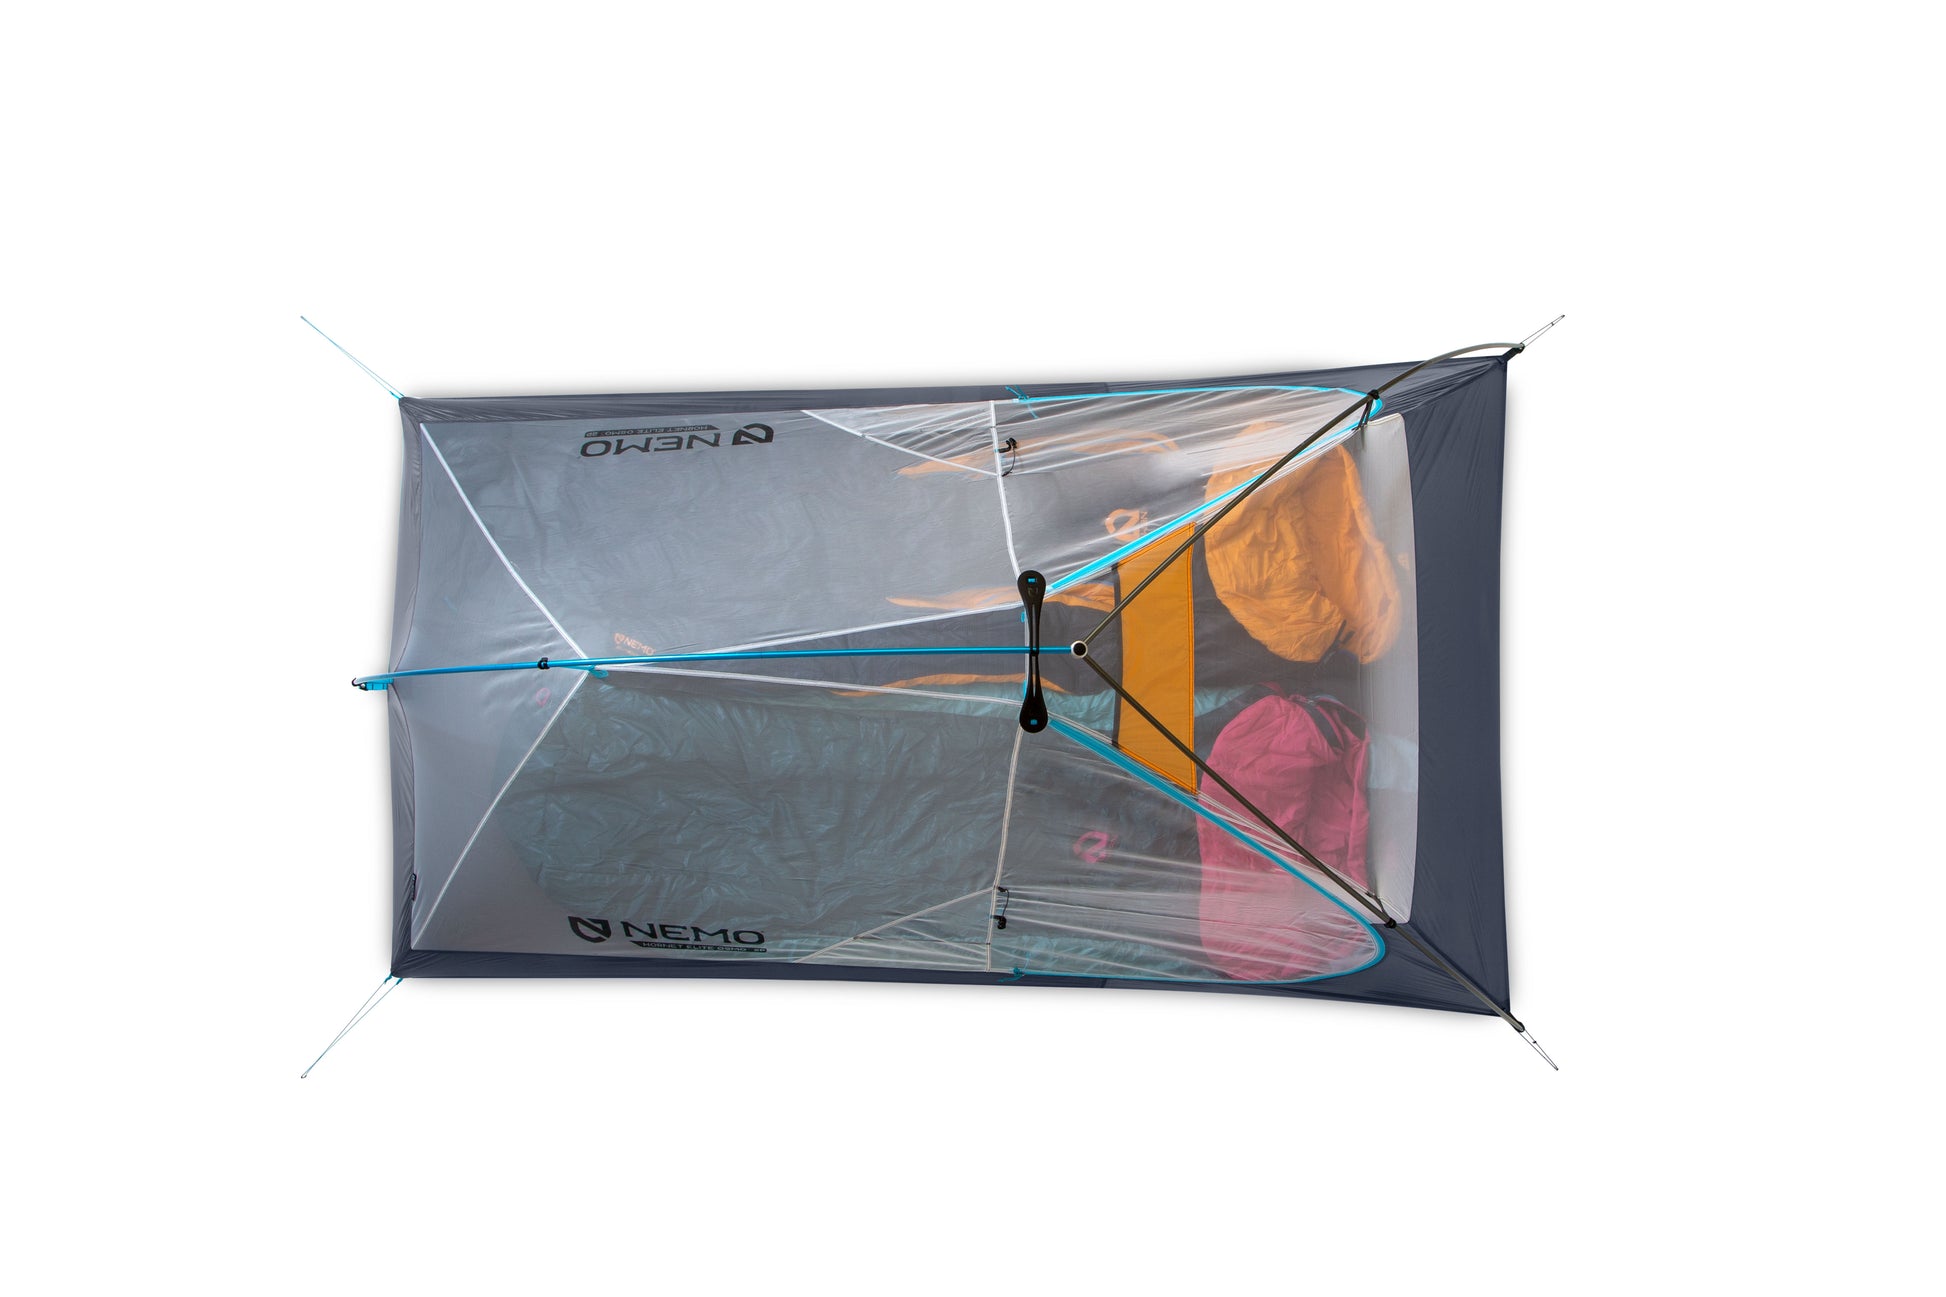 Hornet OSMO Ultralight Backpacking Tent 2 Person